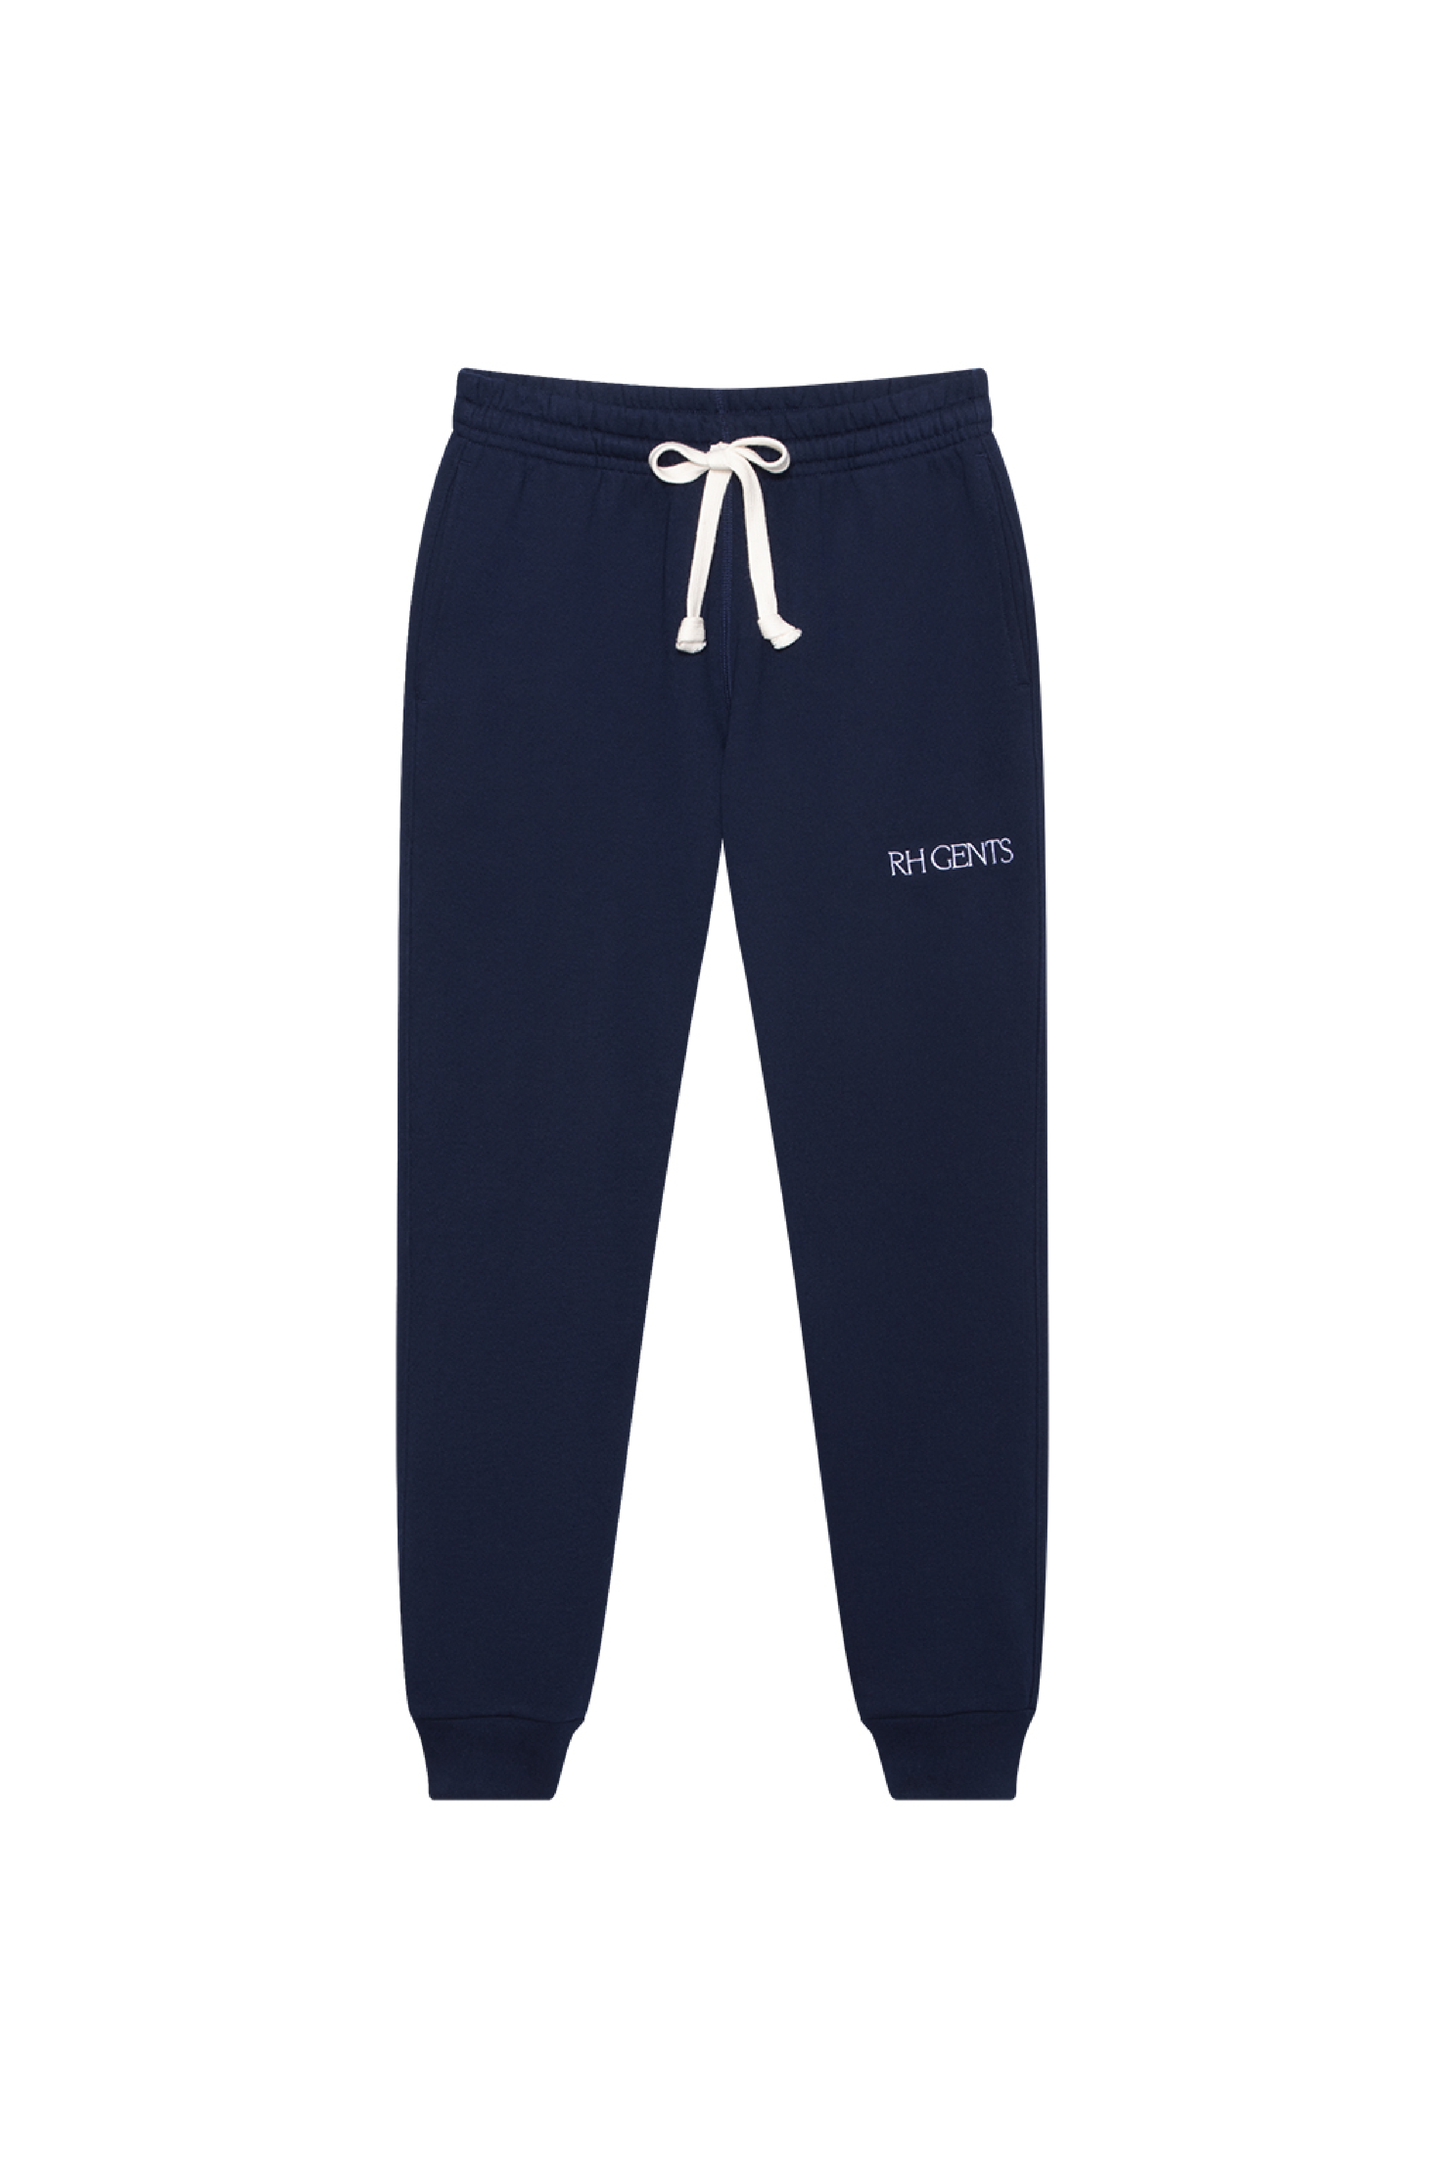 Moose Sweatpant with RH Gents in Navy